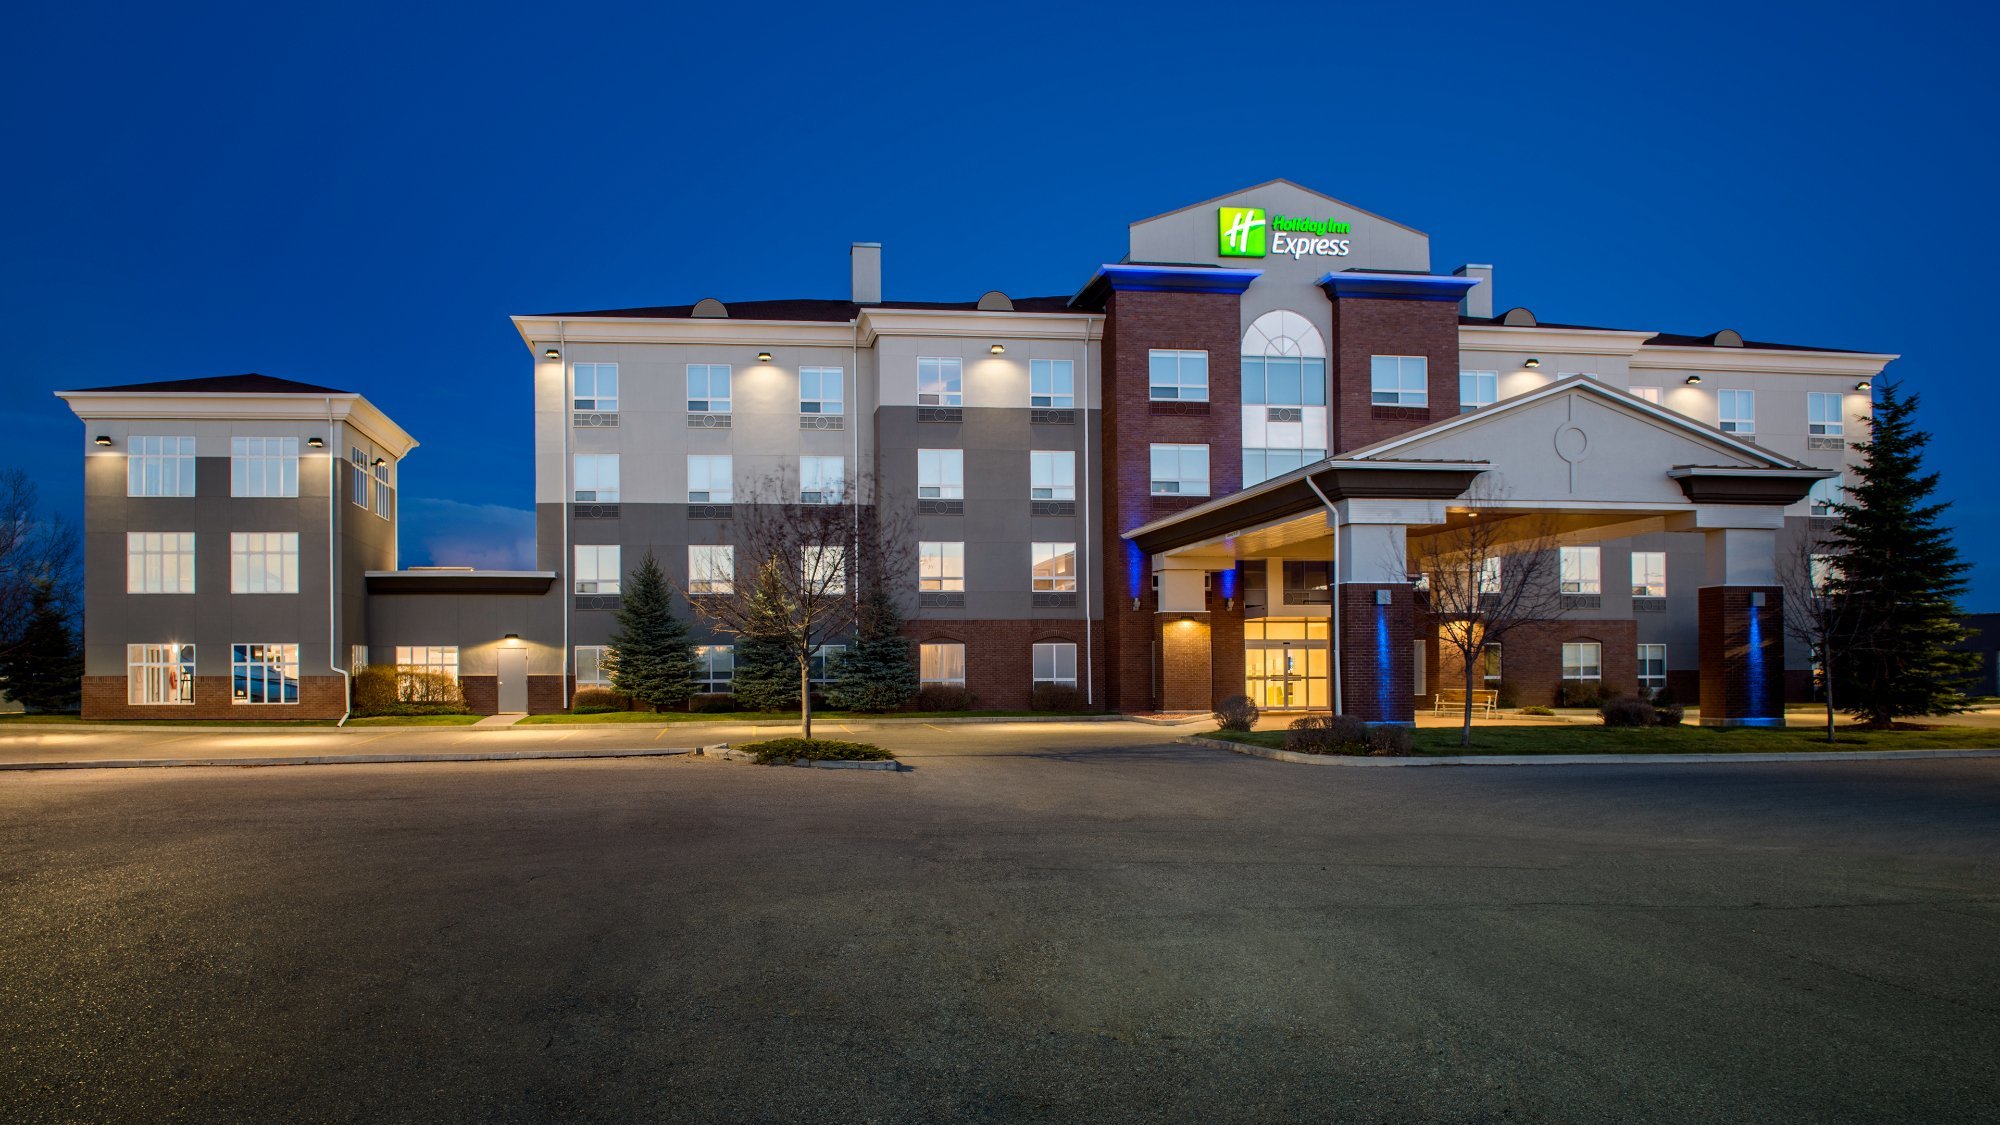 Photo of Holiday Inn Express & Suites Airdrie-Calgary North, Airdrie, AB, Canada